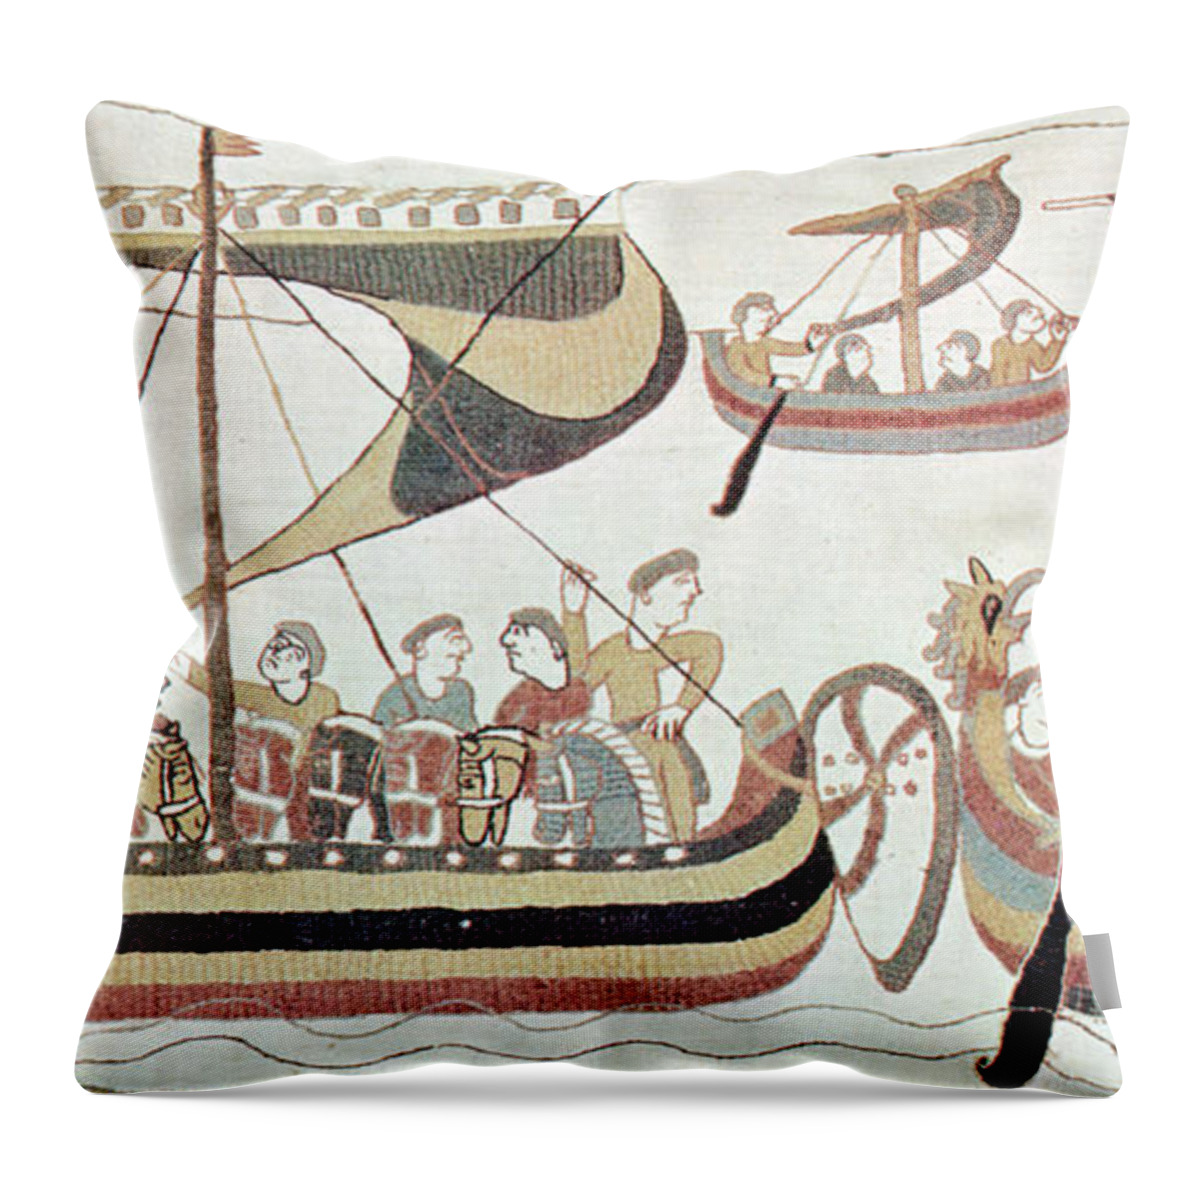 Historic Throw Pillow featuring the photograph Bayeux Tapestry Scene by Science Source